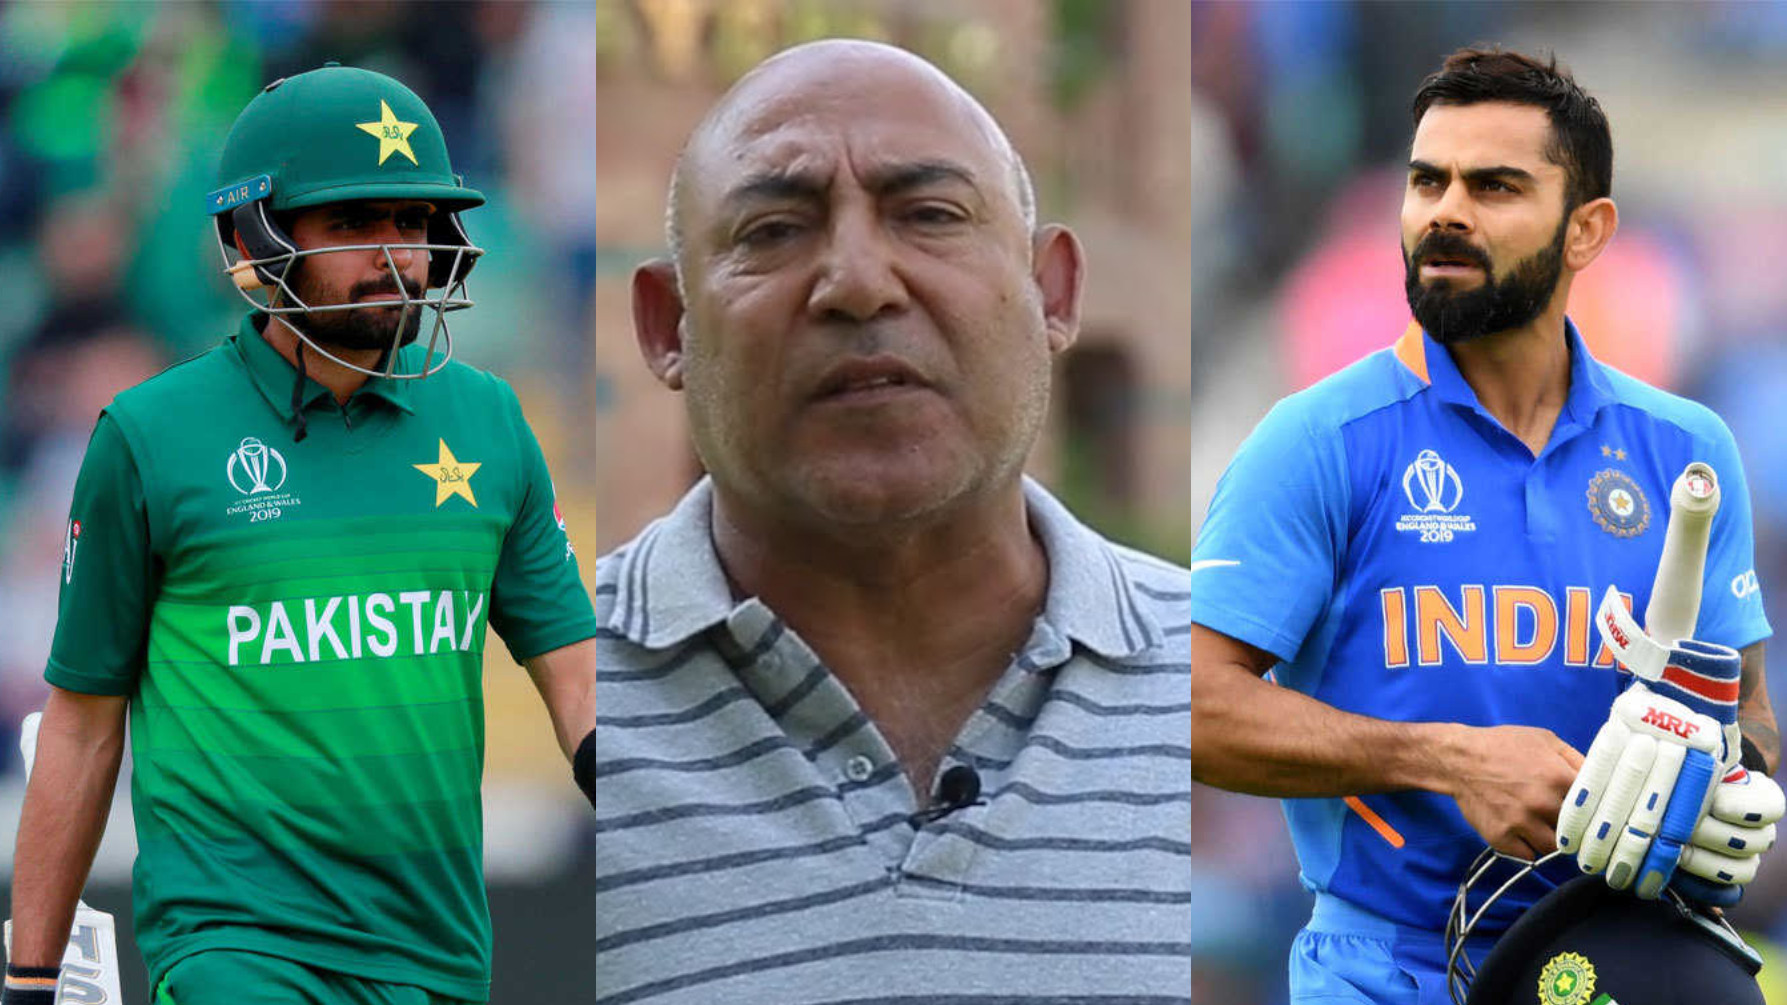 T20 World Cup 2021: Tables will turn- Nazar backs Pakistan to regain lost glory; beat India for first time in World Cup